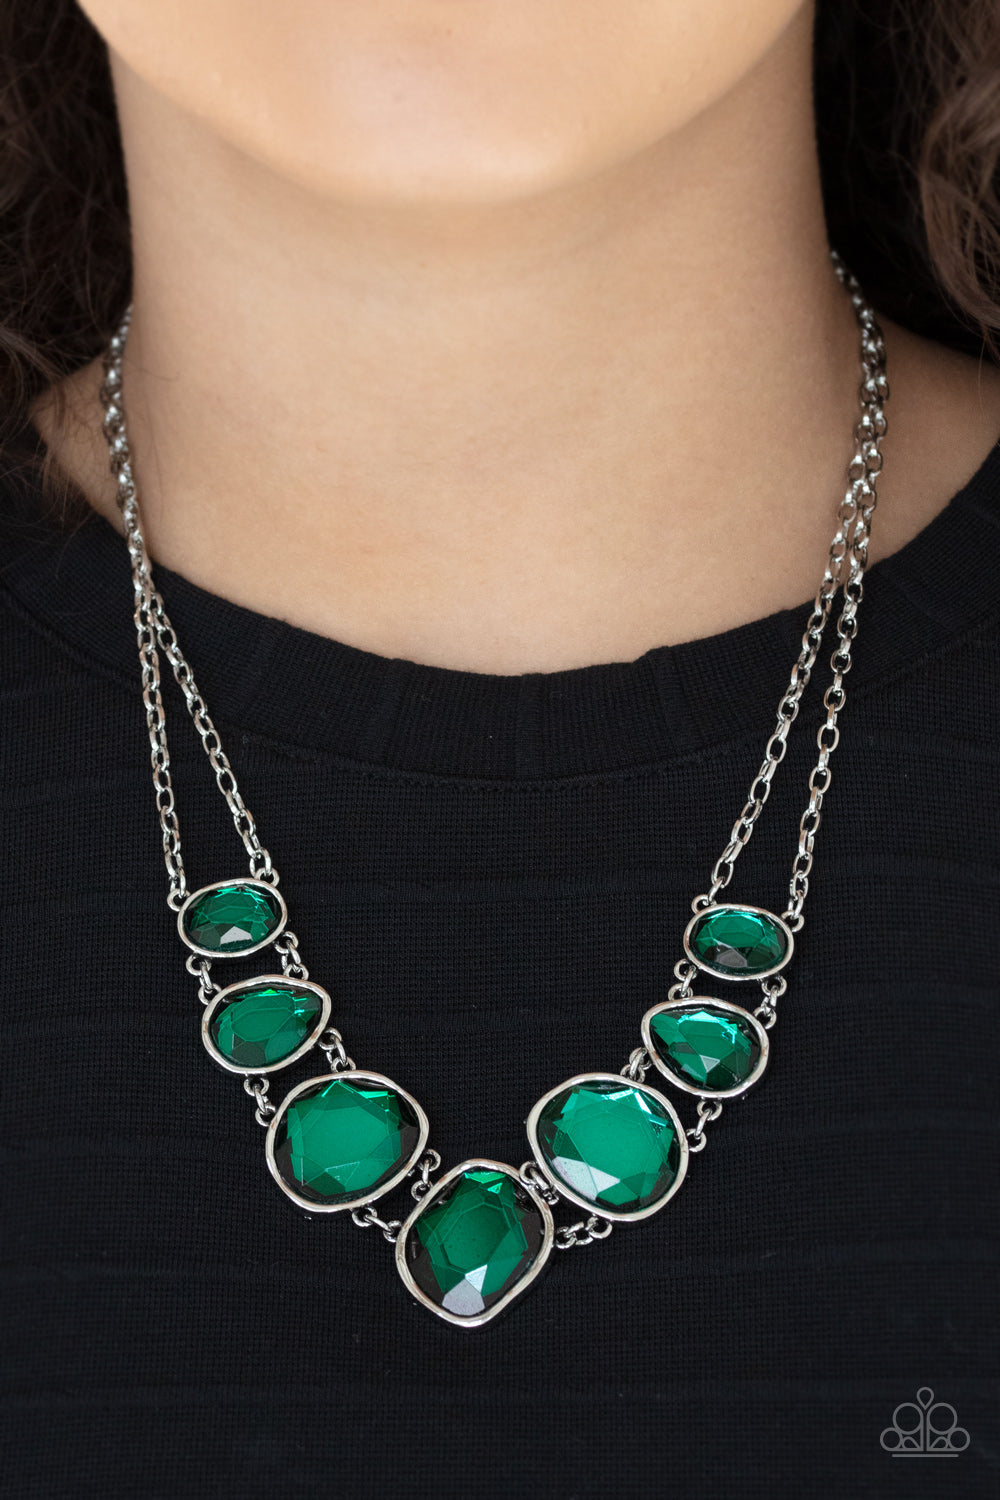 Absolute Admiration - Green Necklace - Paparazzi Accessories - Paparazzi Accessories 